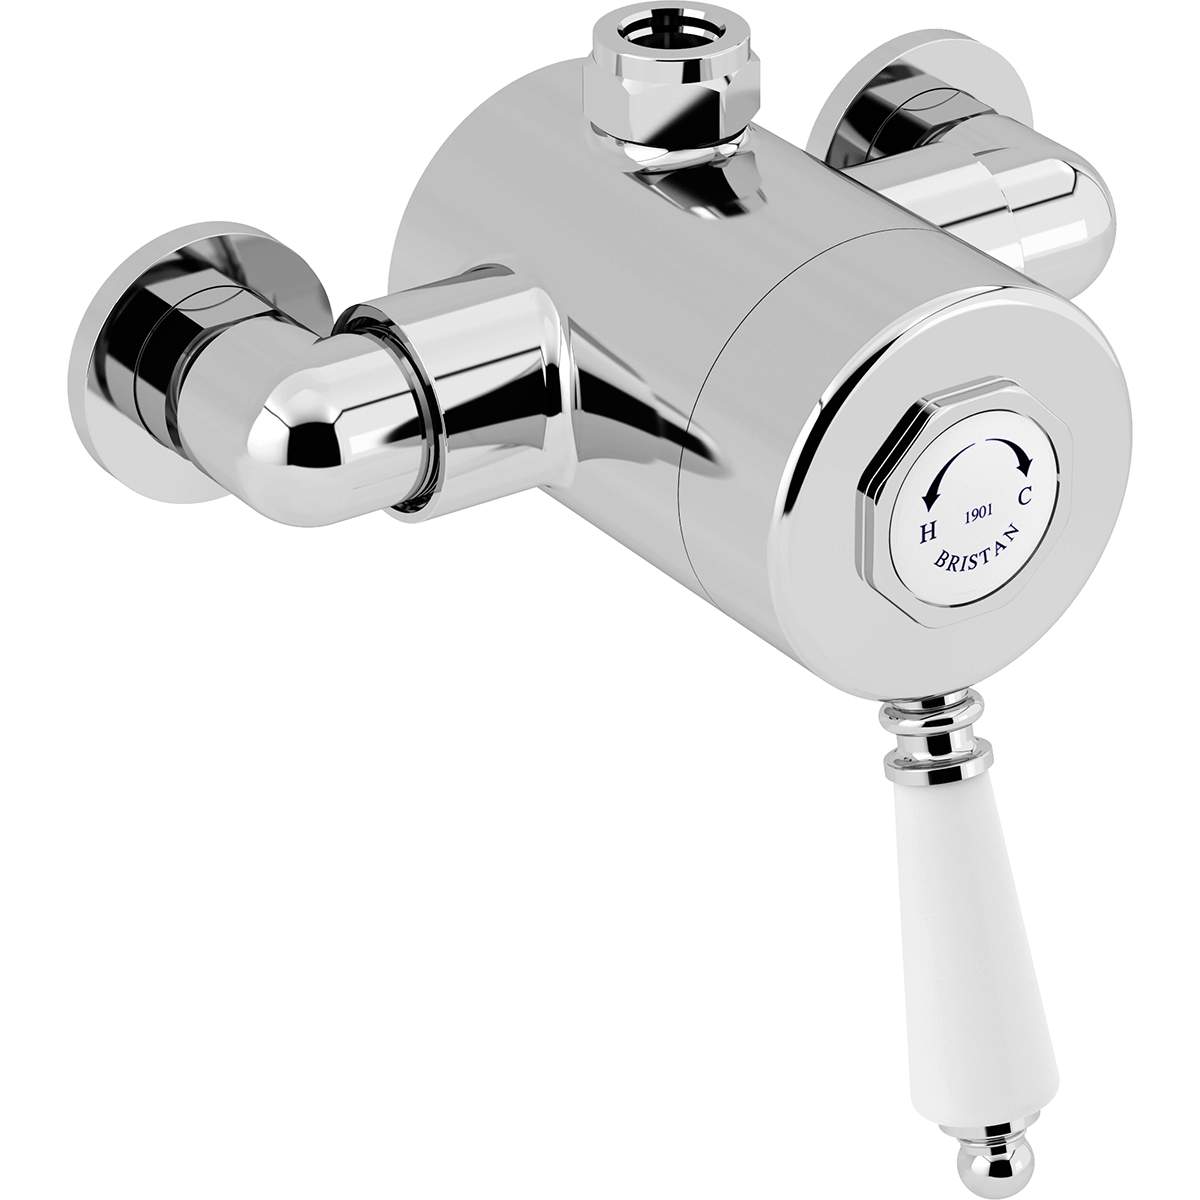 Bristan 1901 Exposed Single Control Shower with Top Outlet (N2 SQSHXTVO C)